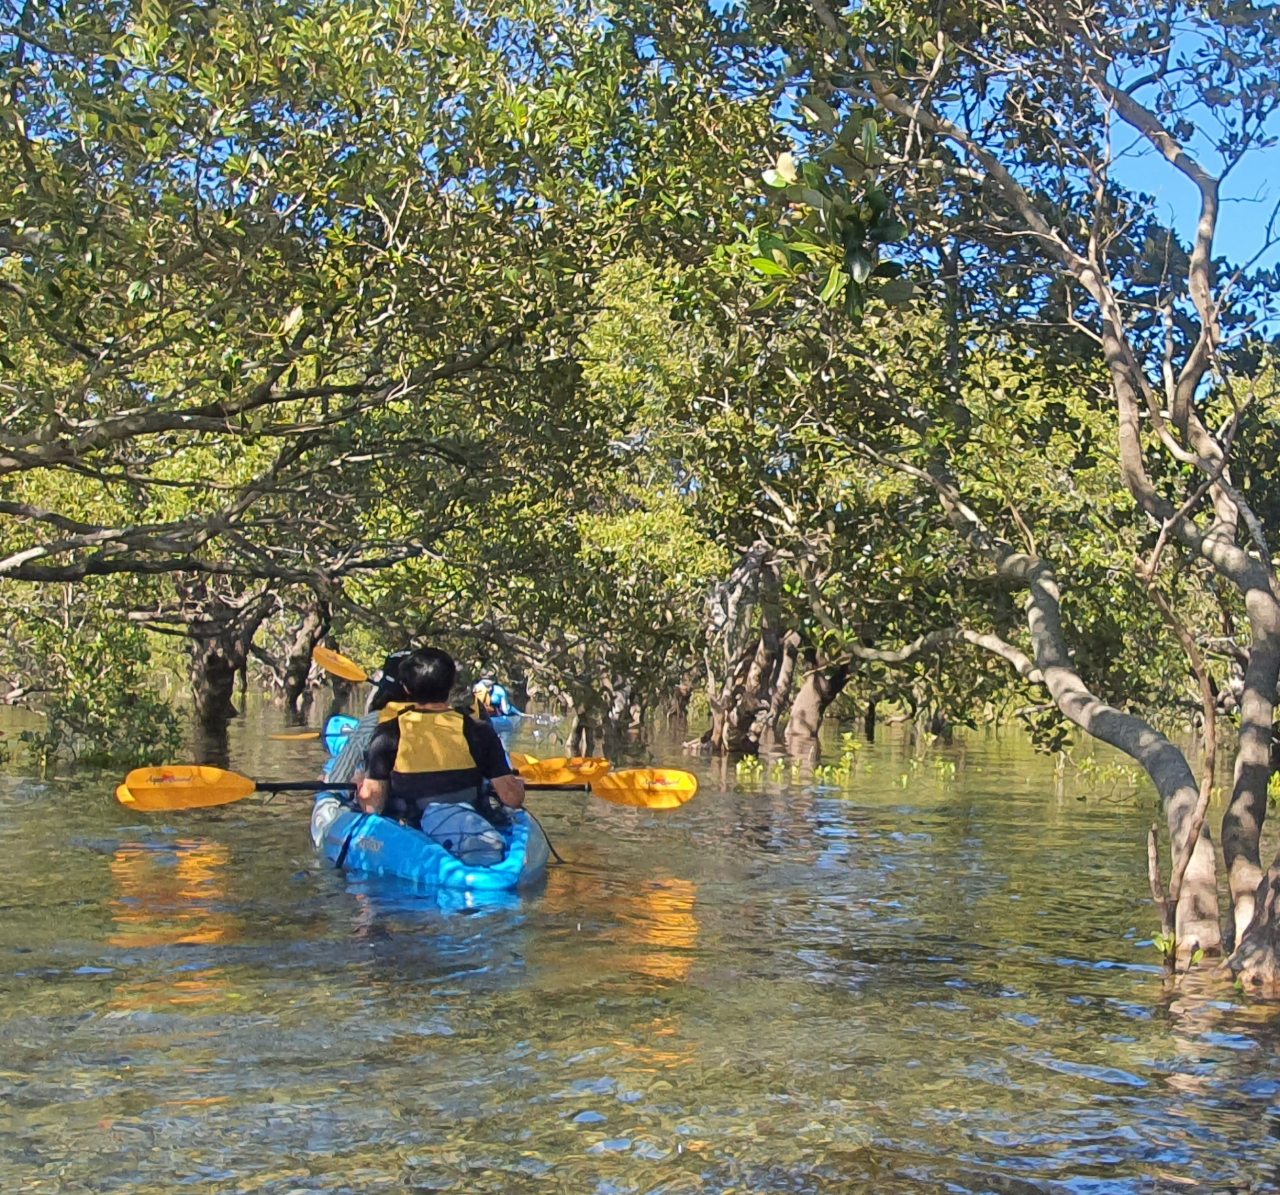 The mangroves in Currambene Creek near Jervis Bay provide shade and dappled surroundings for kayakers. (Paul Kerry/The Korea Herald)